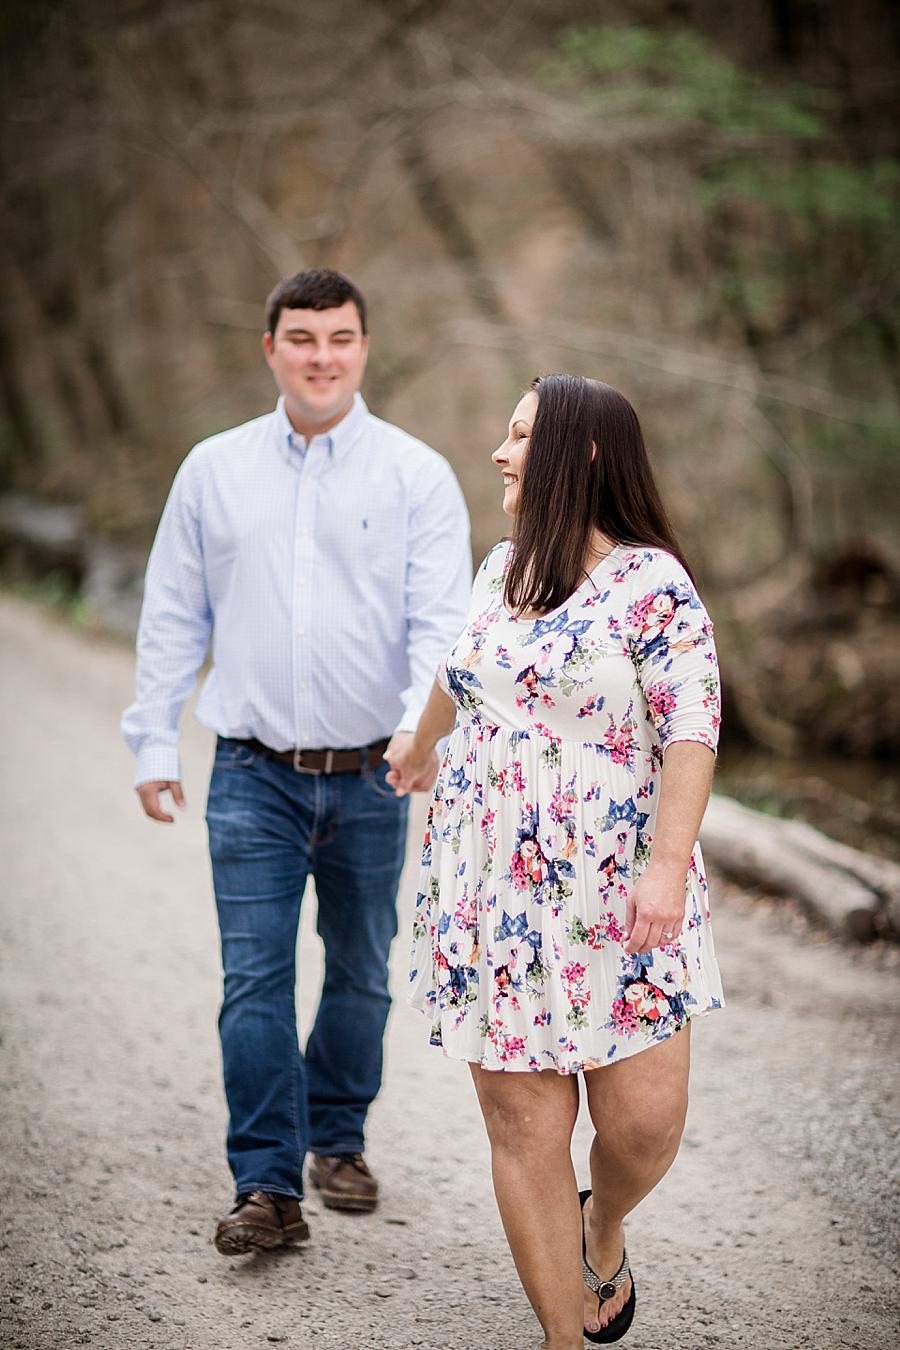 Holding hands at this Norris Dam Engagement Photos by Knoxville Wedding Photographer, Amanda May Photos.